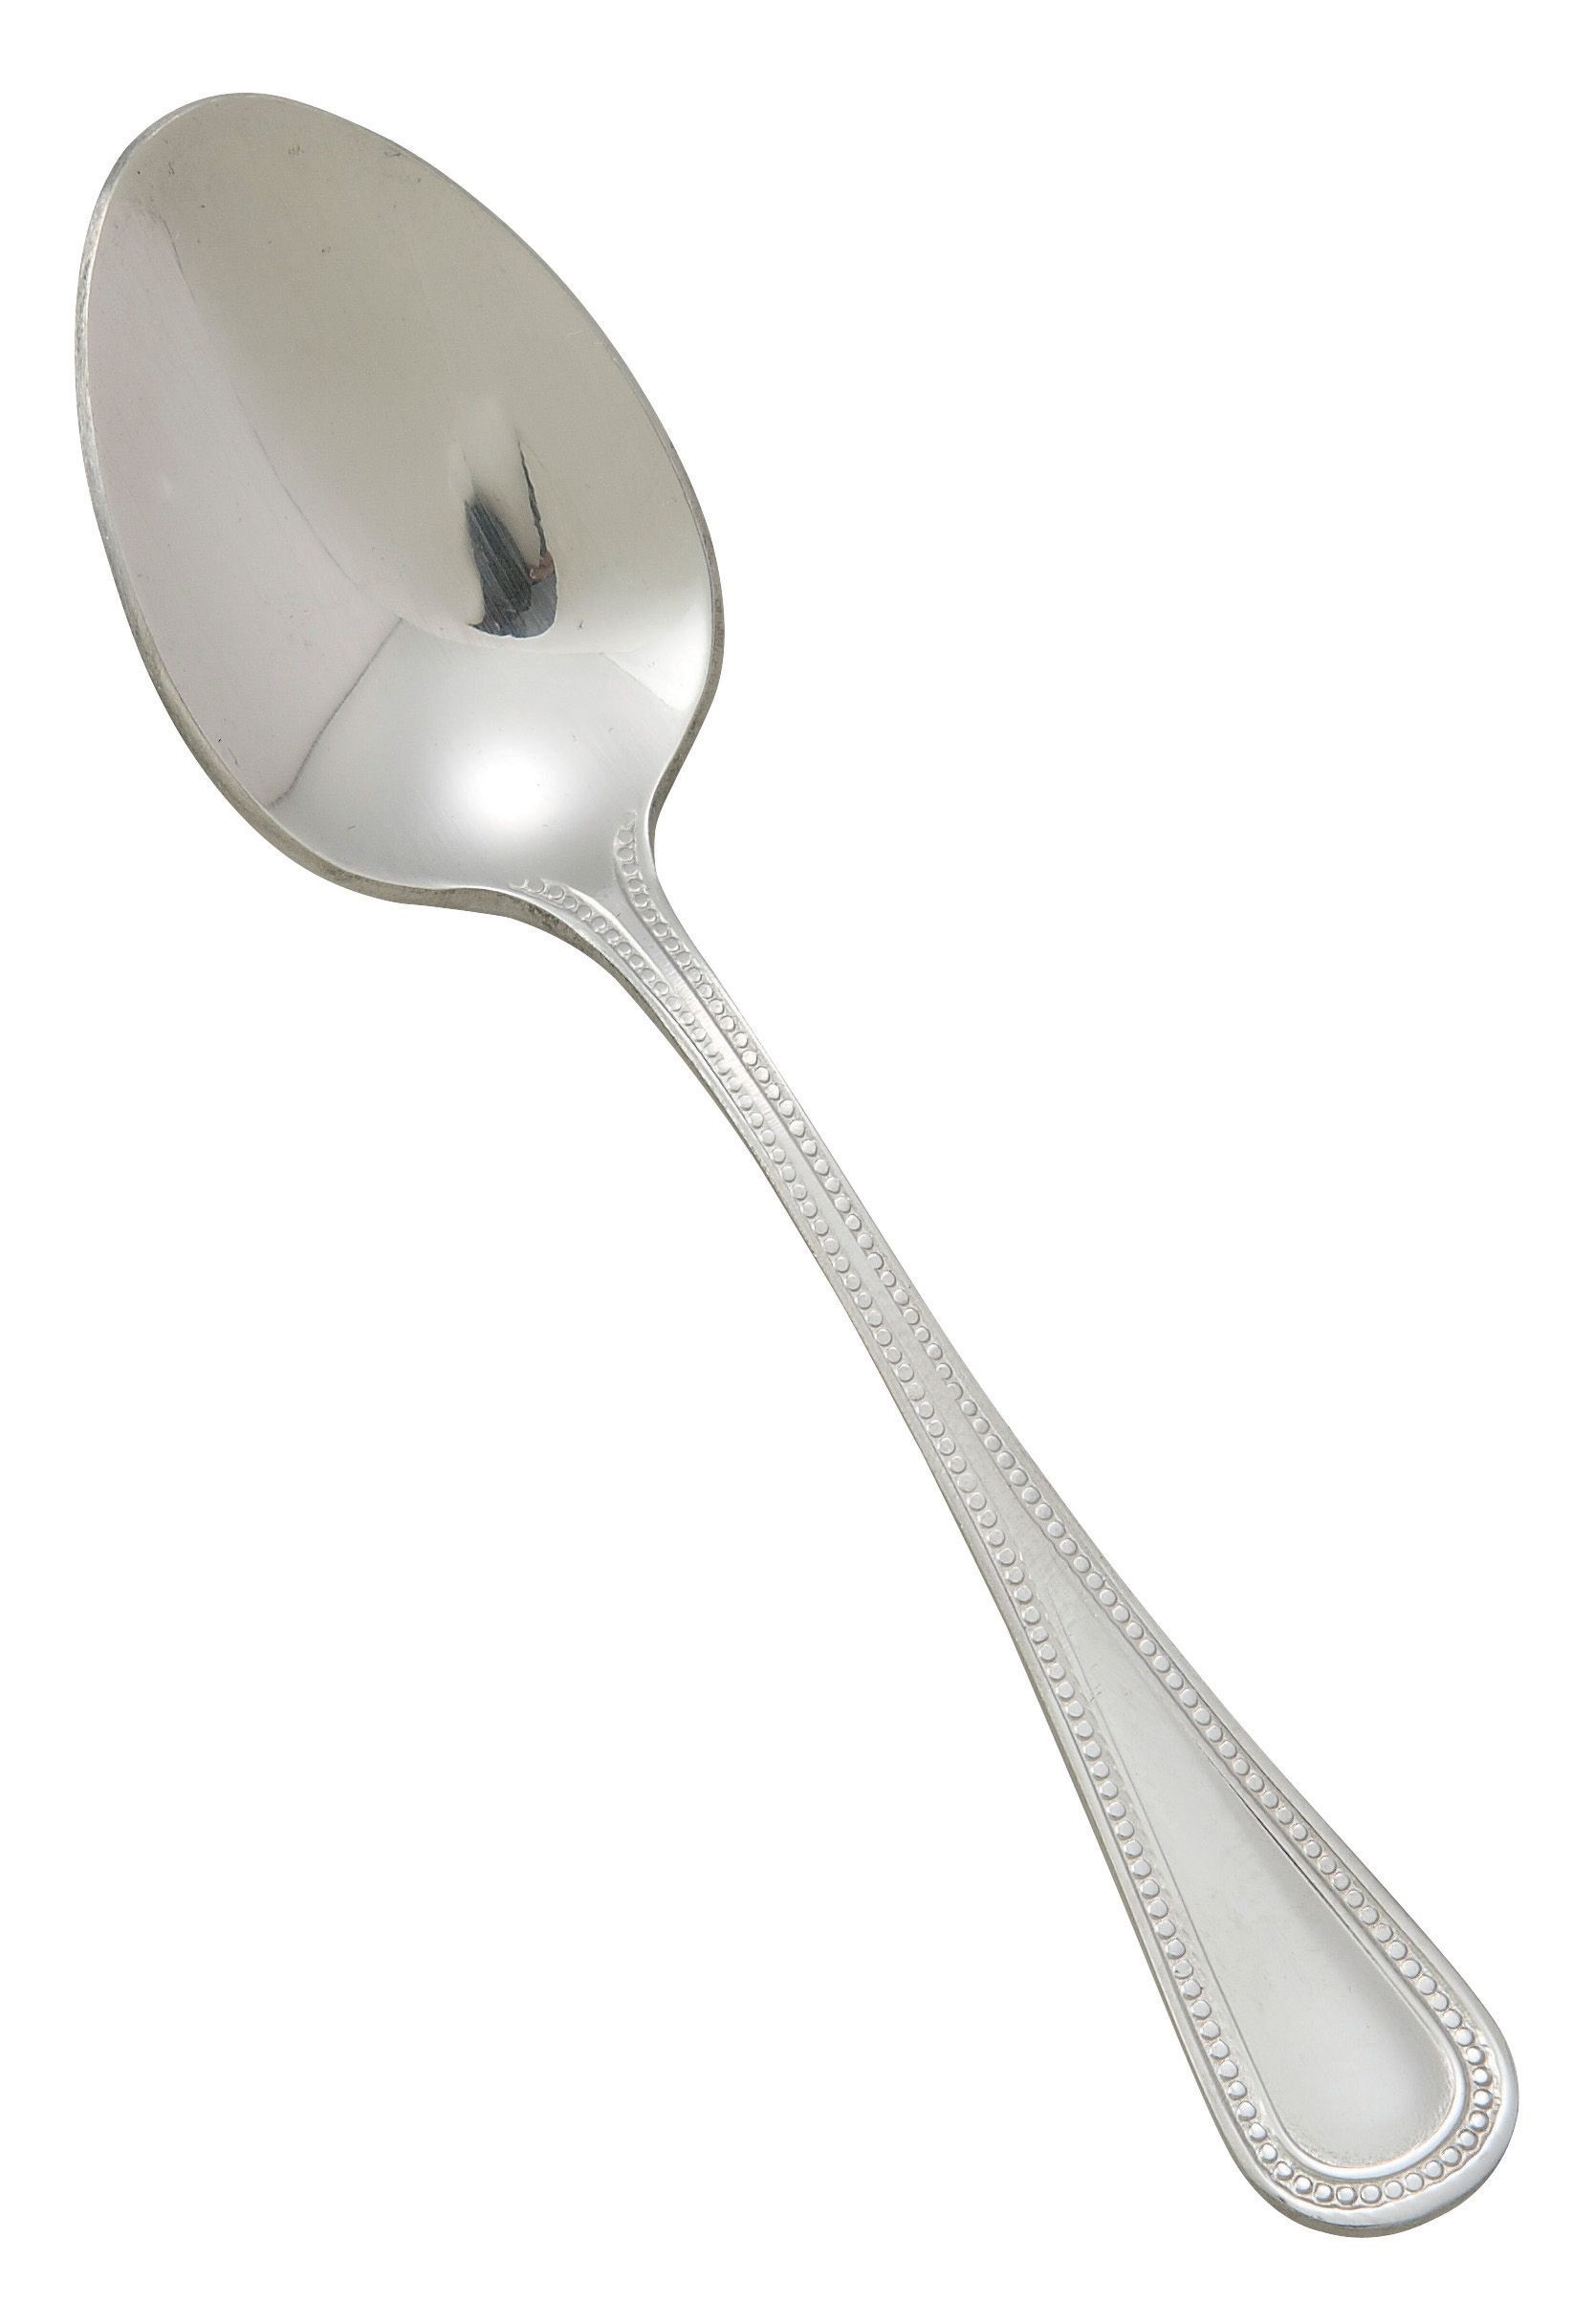 Winco 0036-09 Deluxe Pearl Extra Heavy Stainless Steel Demitasse Spoon (12/Pack)